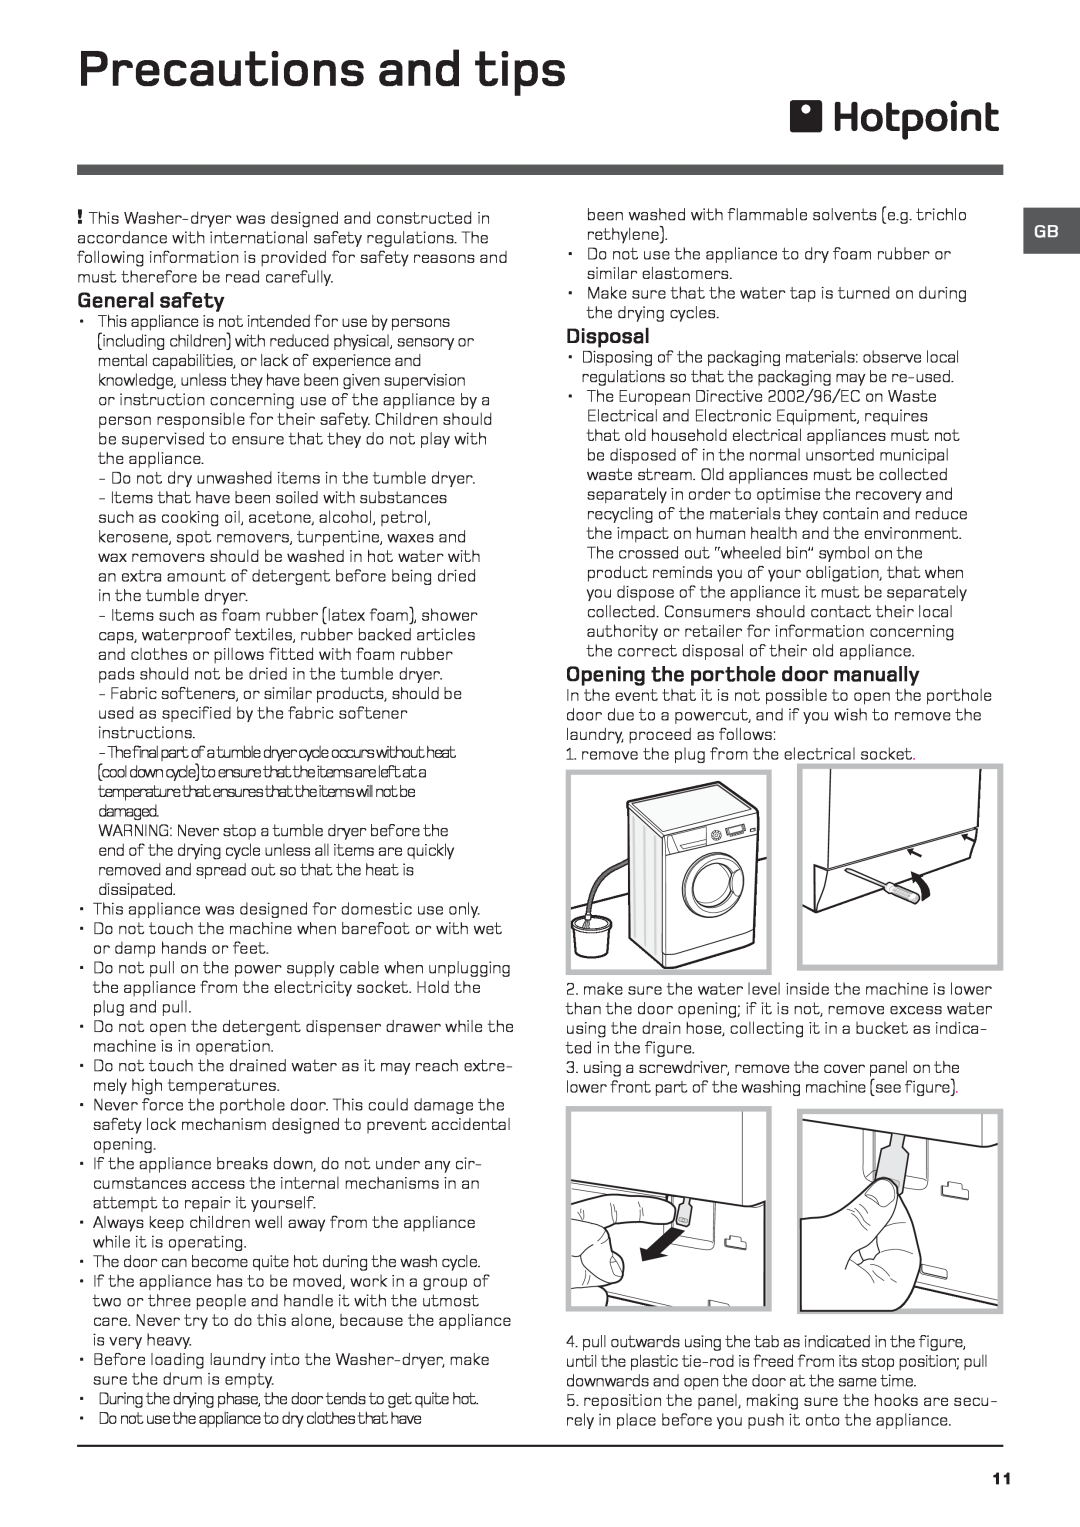 Hotpoint WDD 960 P/G/A/K Precautions and tips, General safety, Disposal, Opening the porthole door manually 